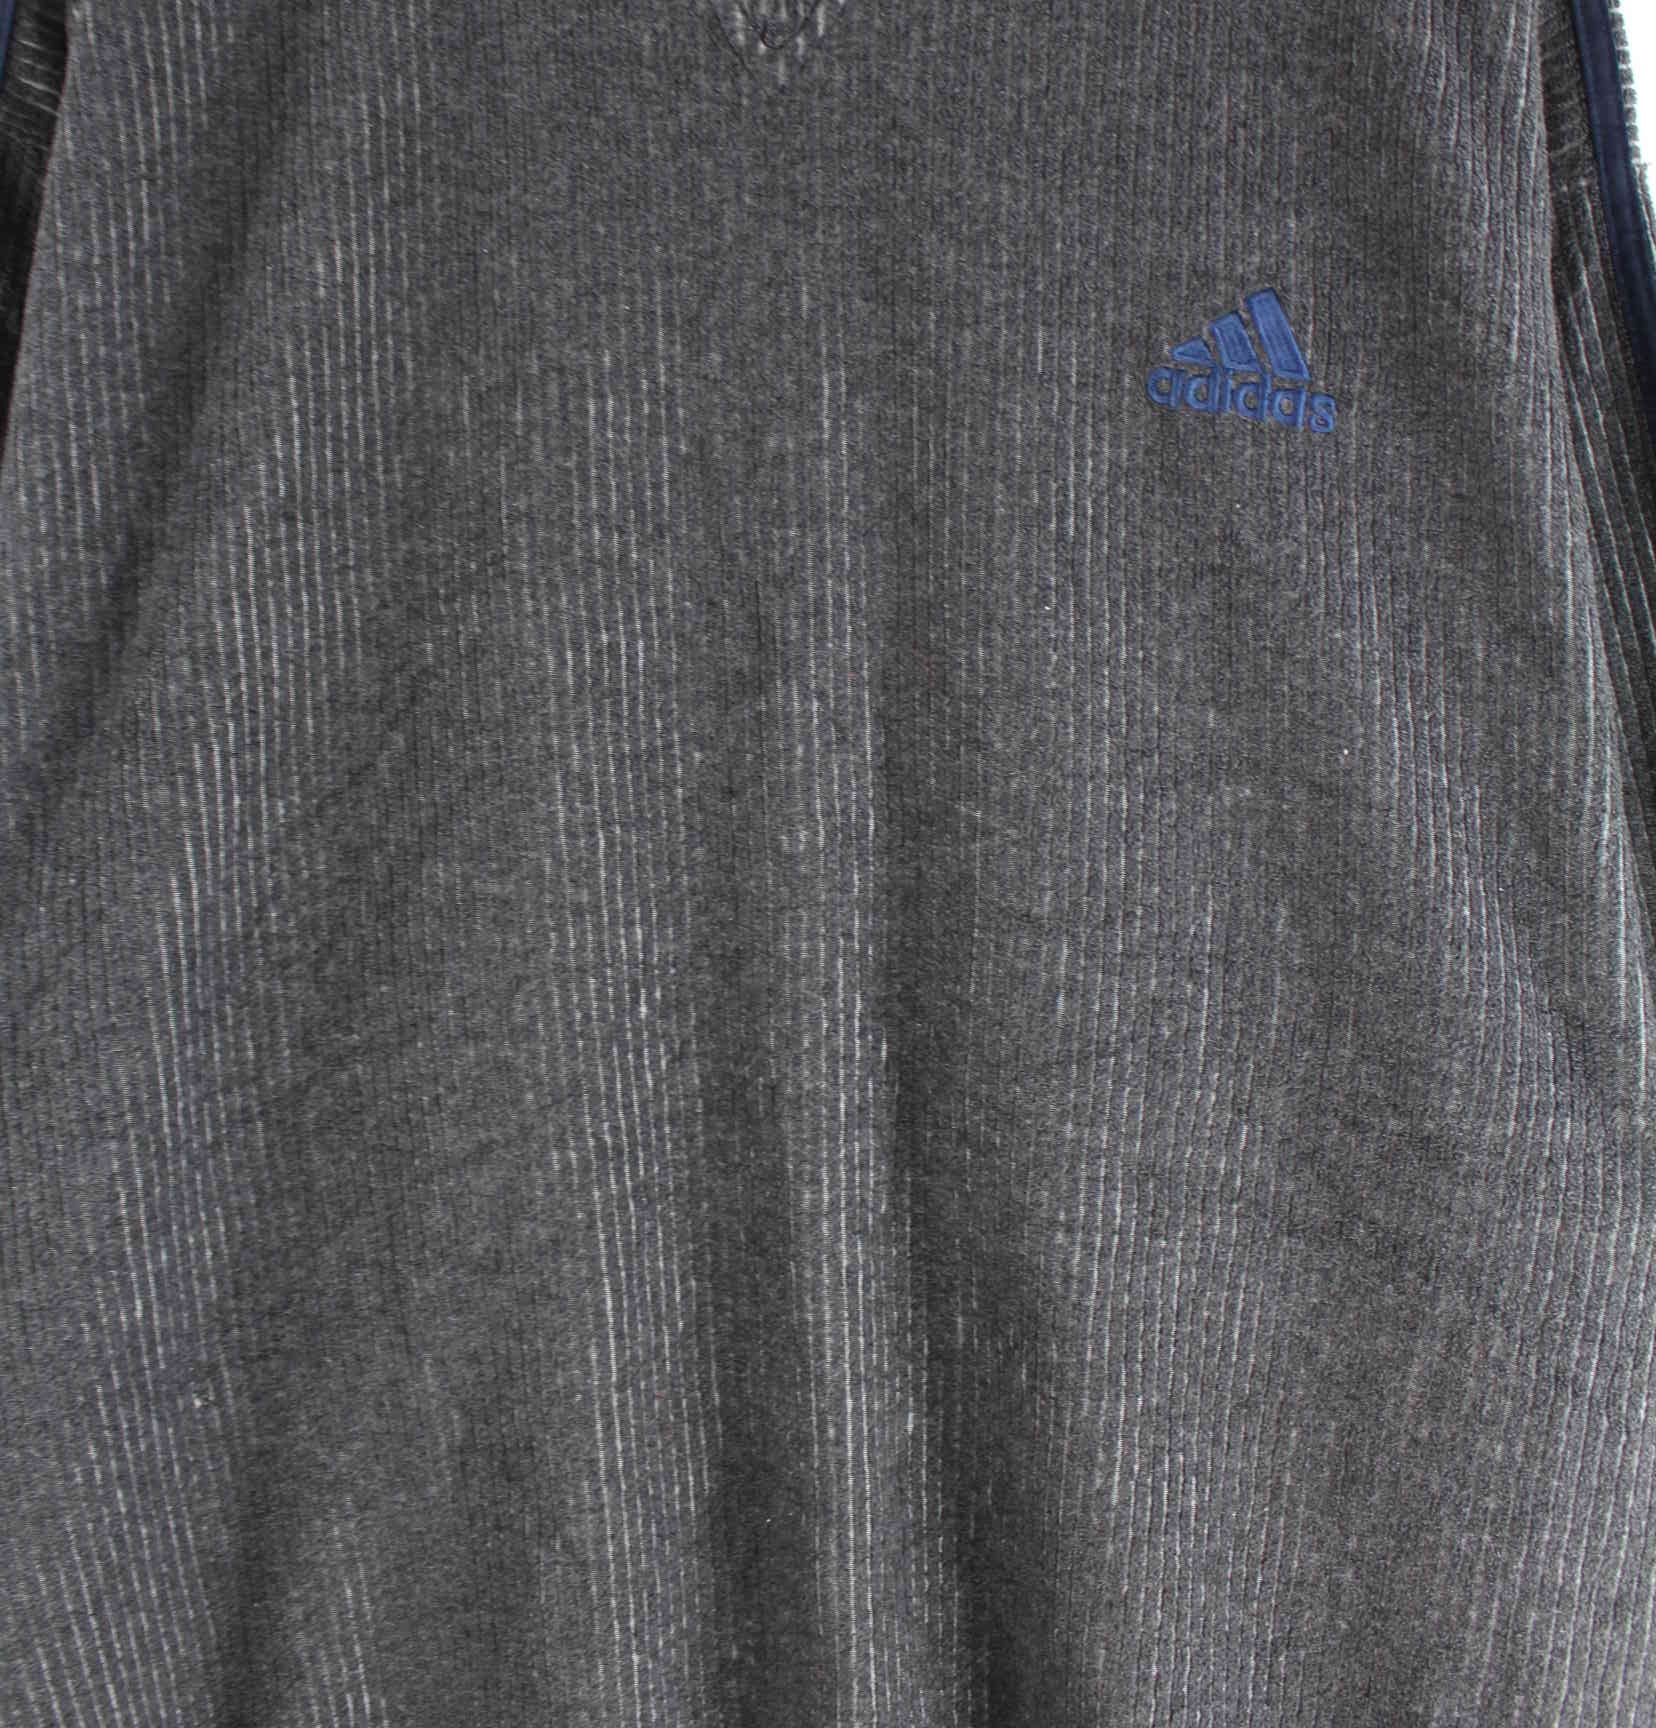 Adidas 90s Vintage Embroidered Sweater Grau XL (detail image 1)